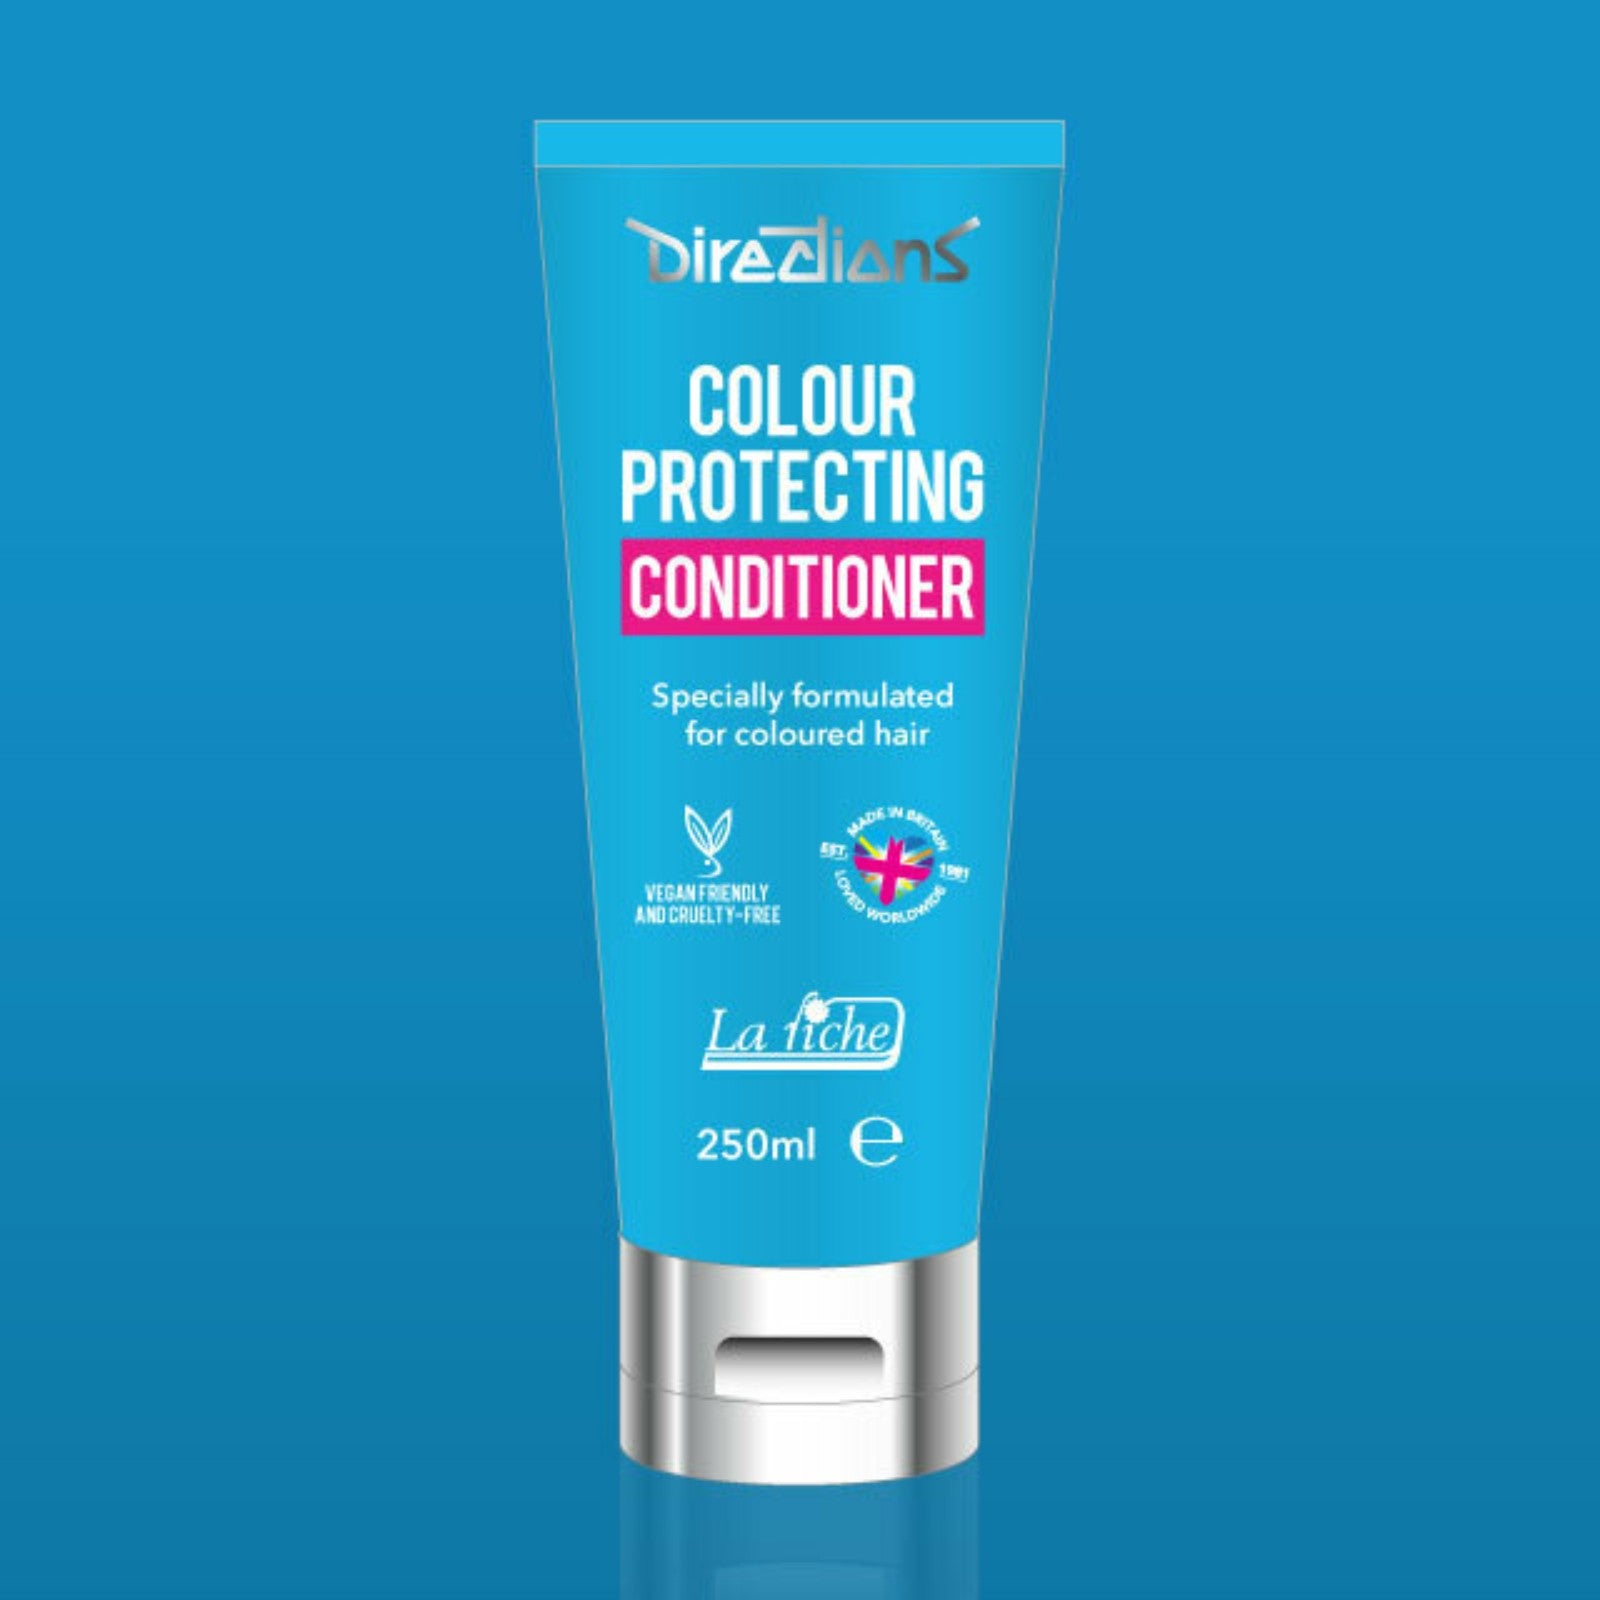 Directions Colour Protecting Conditioner, 250ml